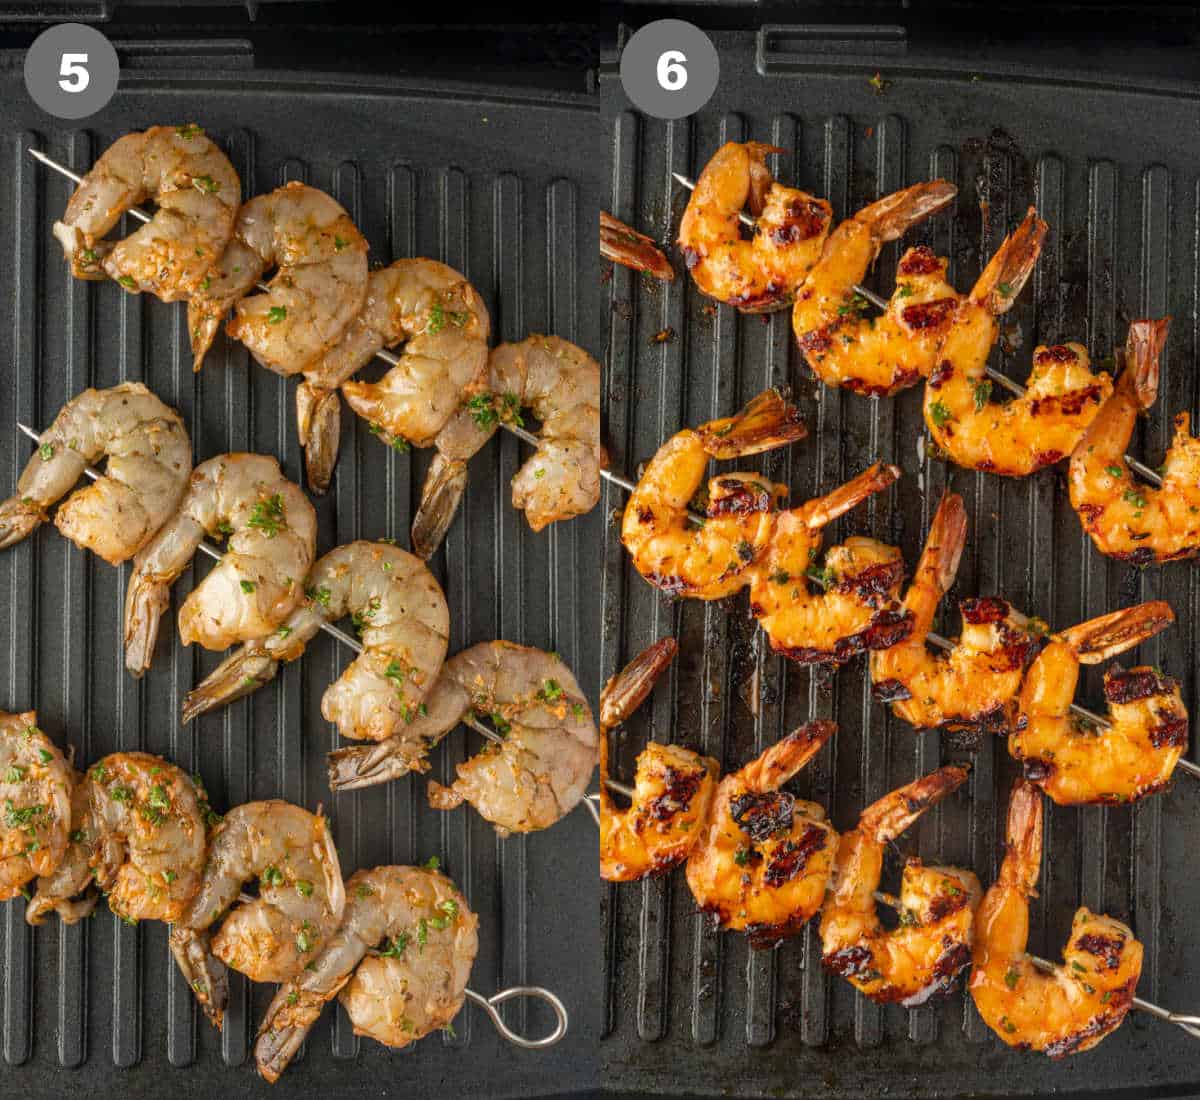 Shrimp skewers placed on a grill and cooked.